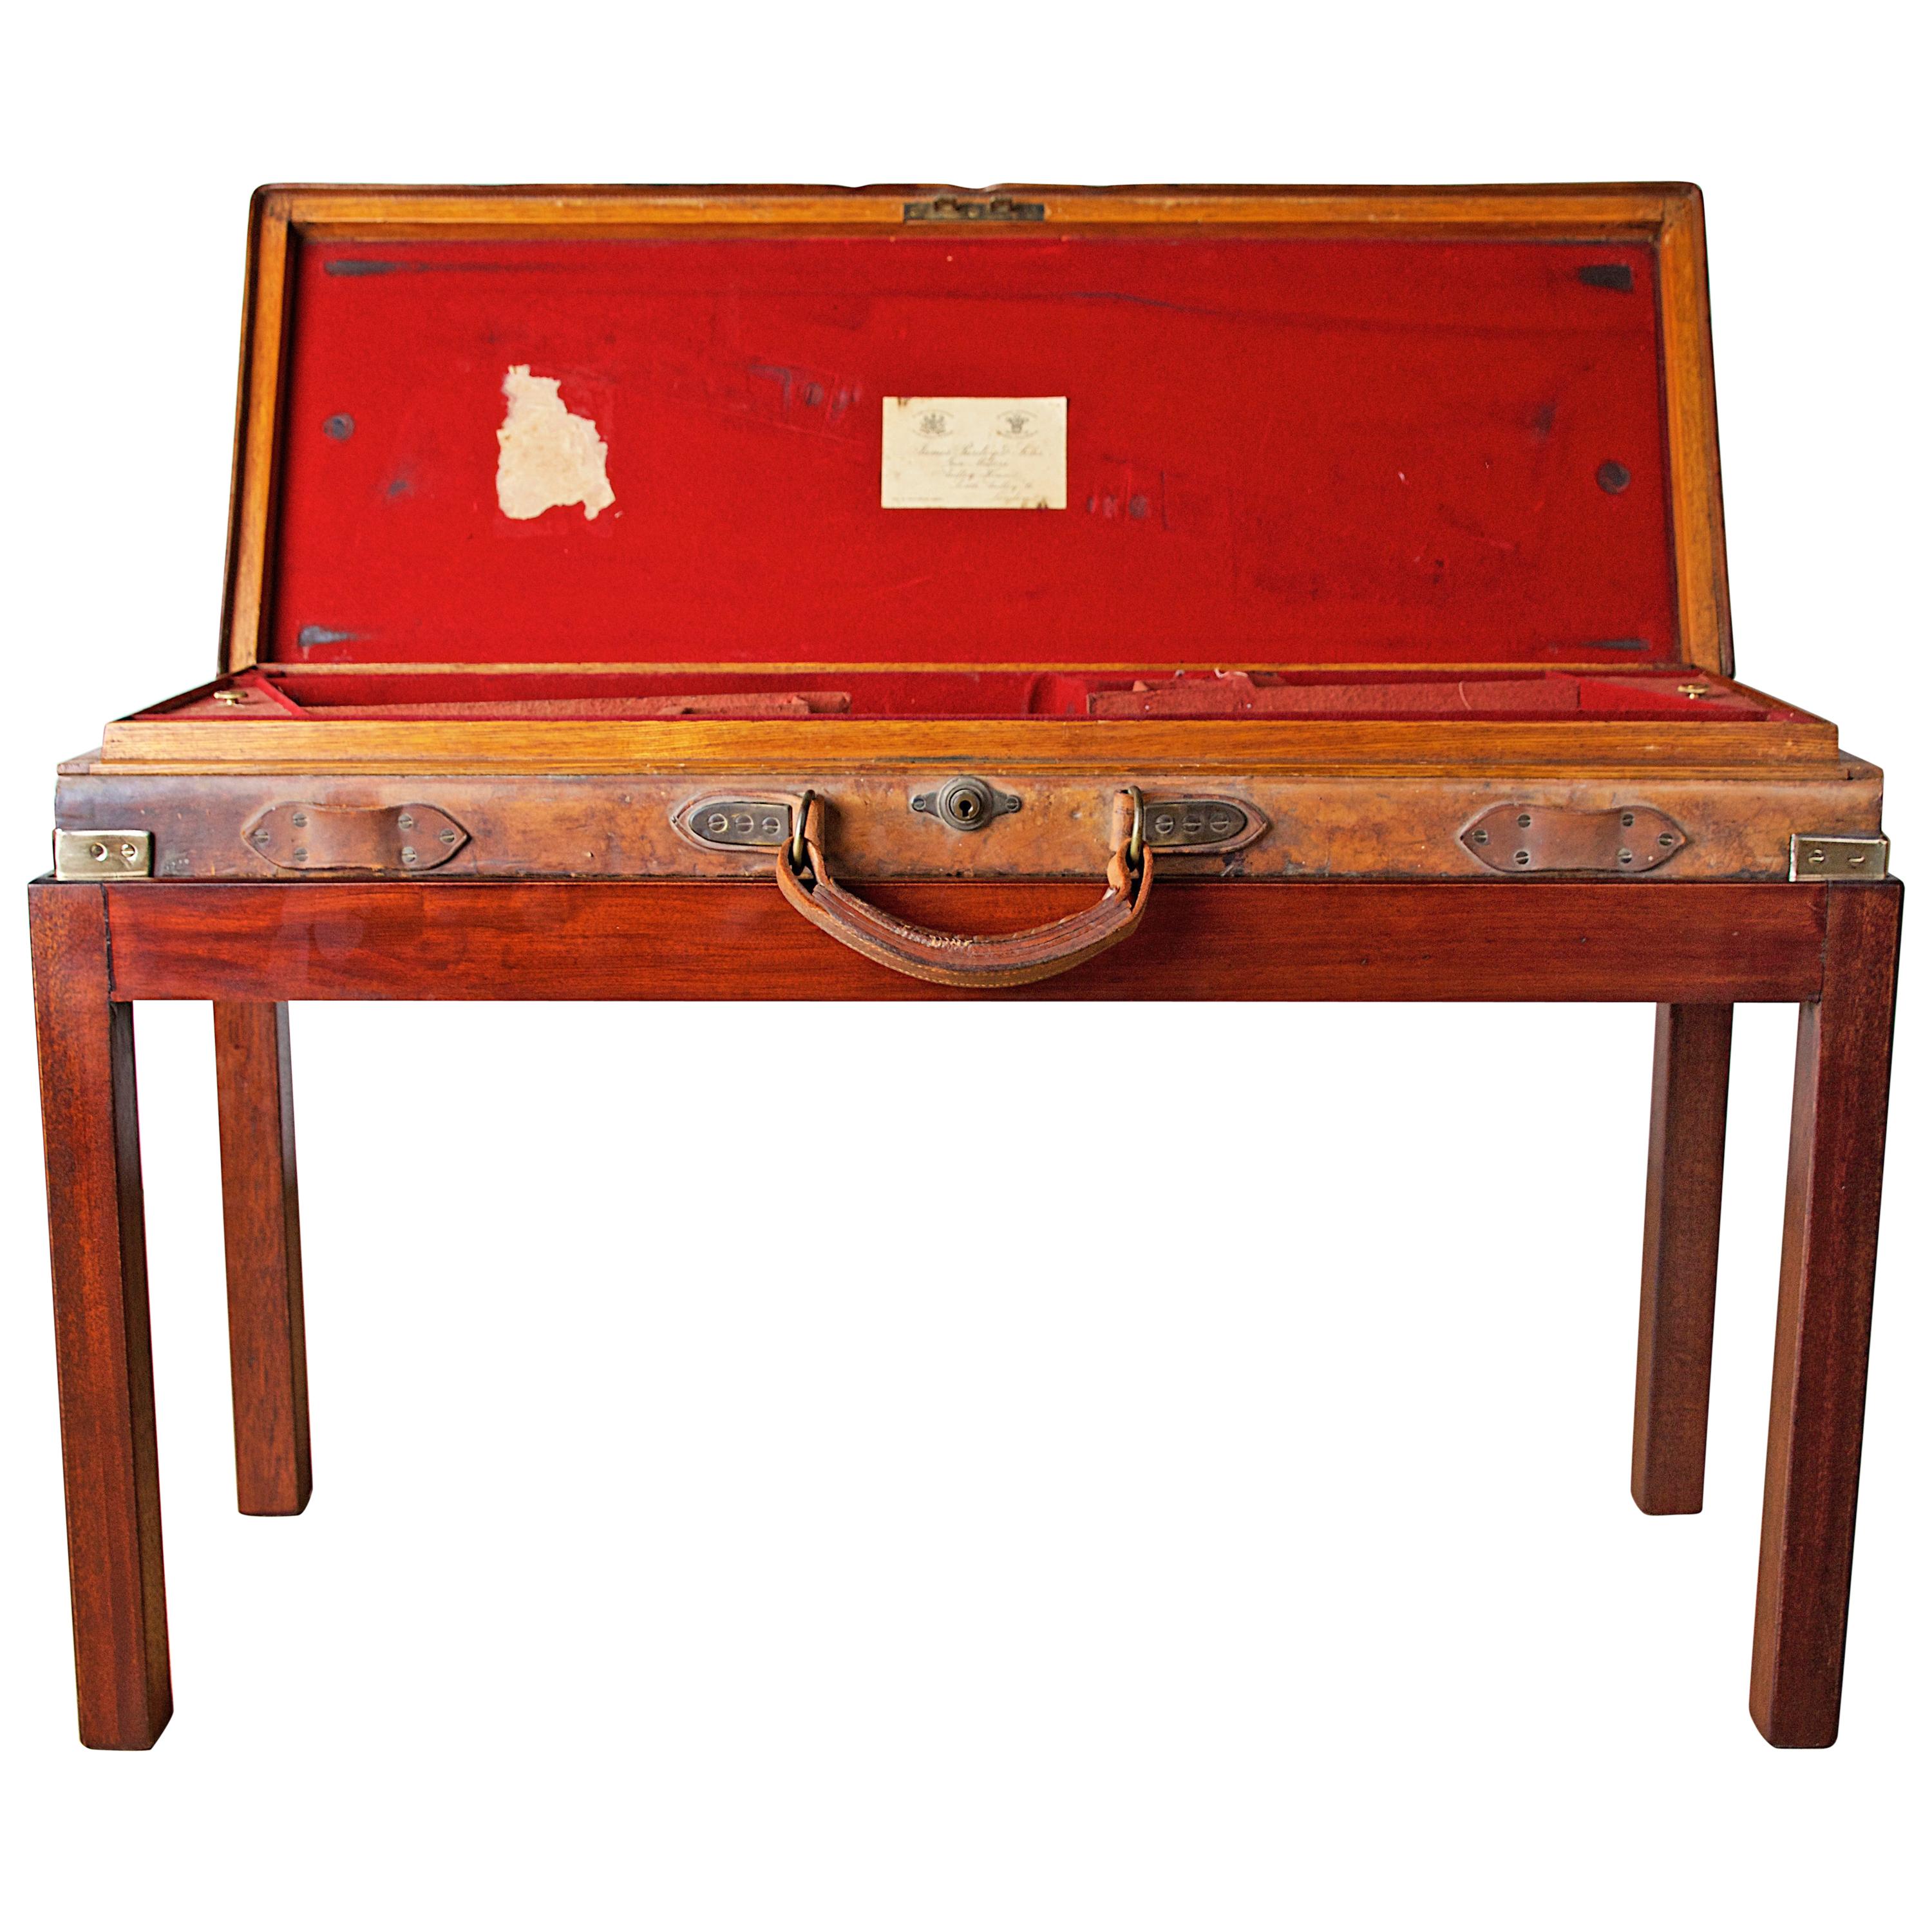 James Purdey & Sons, London, Leather, Oak and Brass-Mounted Gun Case